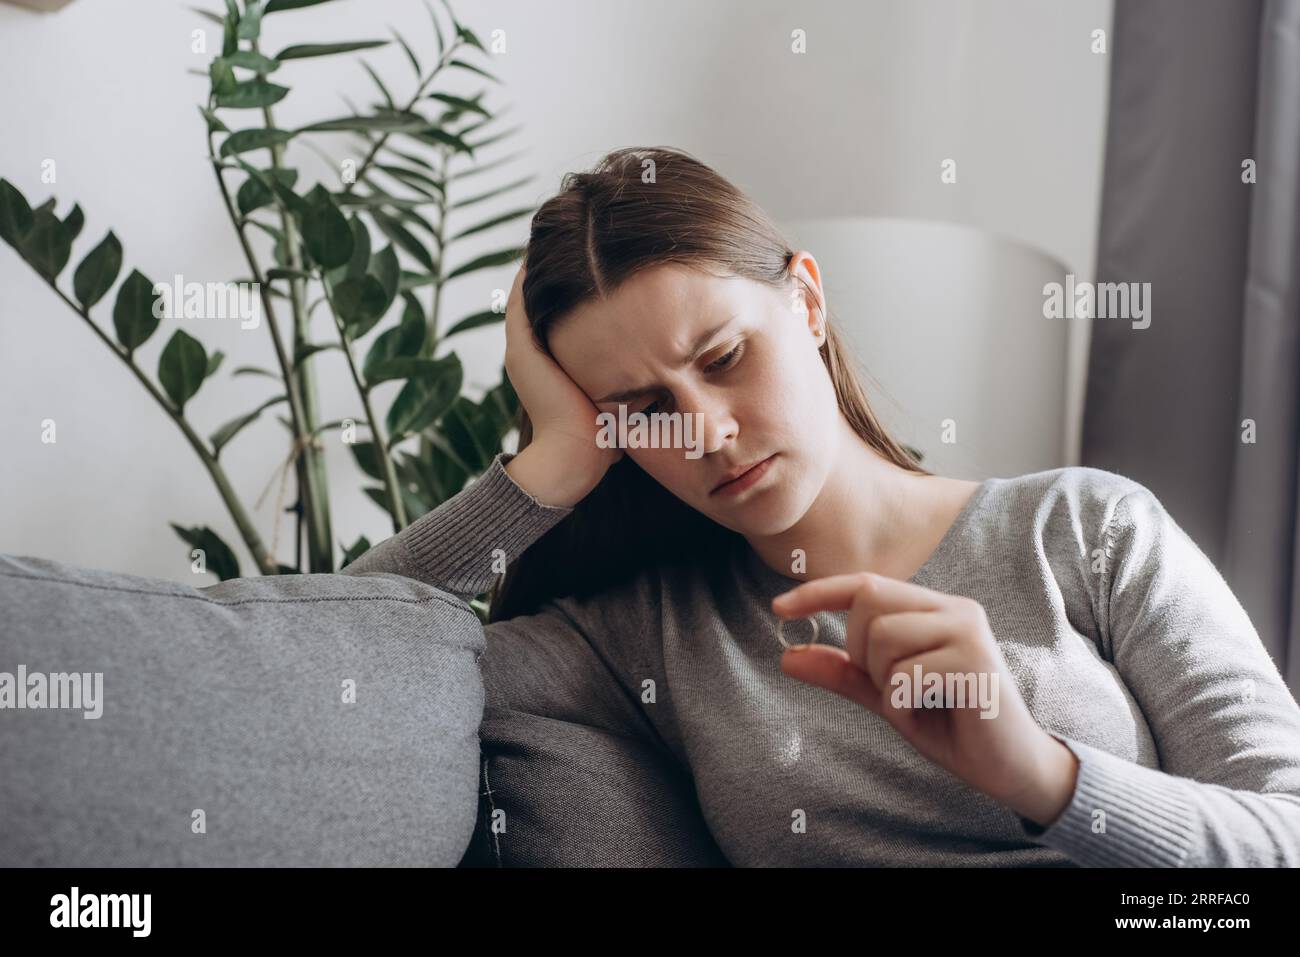 Frustrated unhappy desperate woman sits on sofa holding engagement ring in hand, stressed young female suffering from relations breakup or fiancee bet Stock Photo